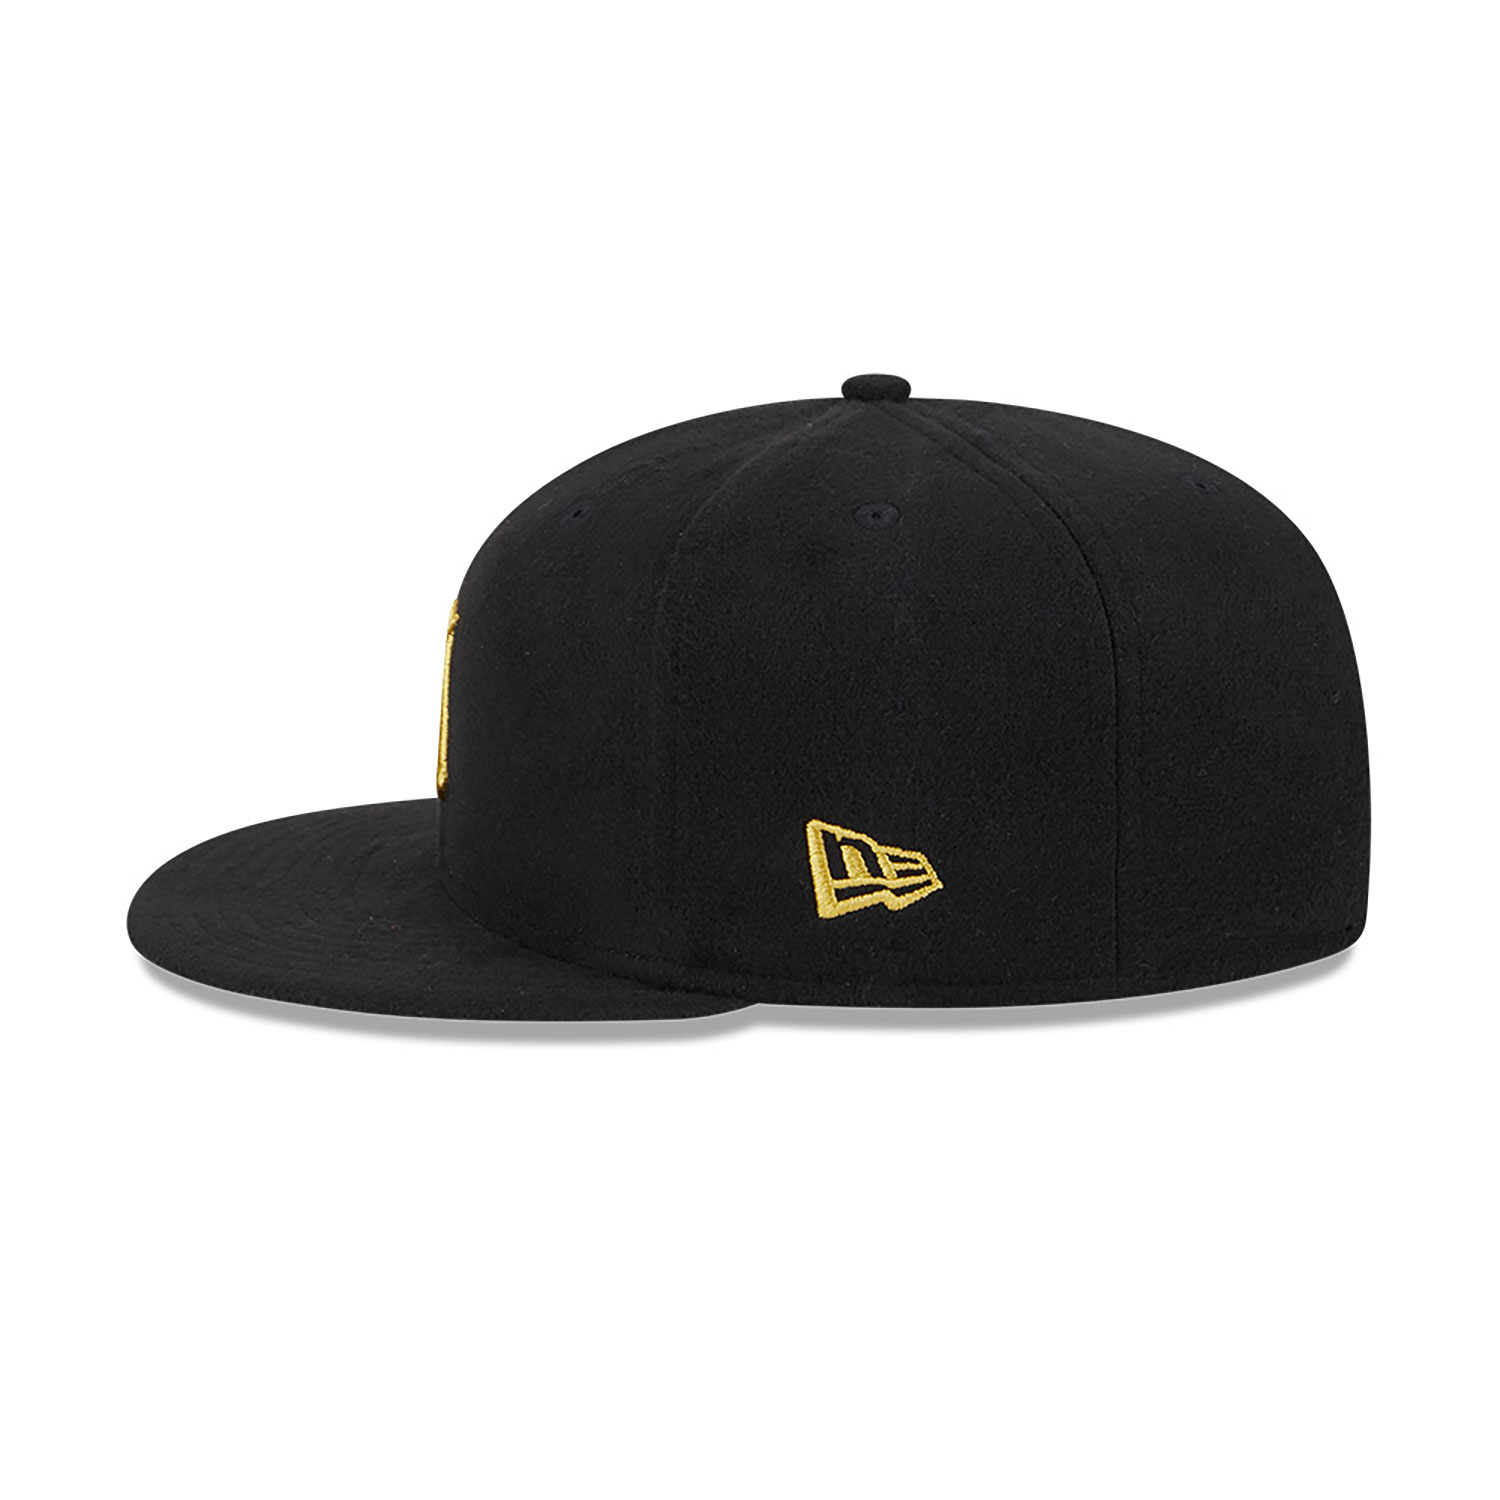 Harry Potter and the Deathly Hallows Part 2 Hufflepuff Black 9FIFTY Snapback Cap